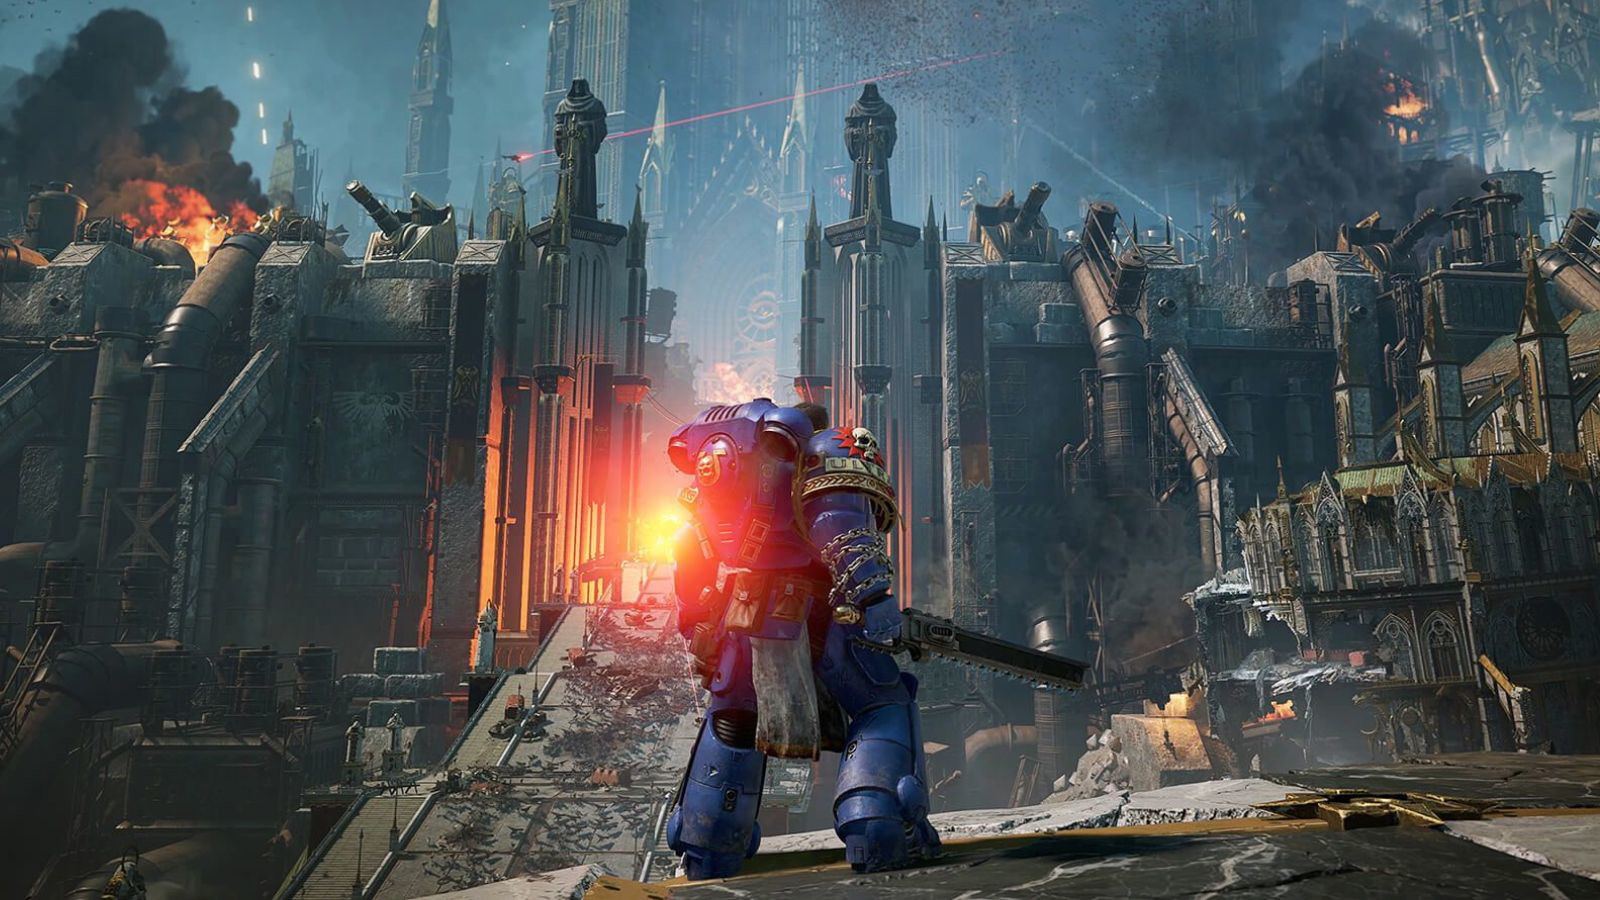 There are things fans will need to let go of in Space Marine 2. Image Credit: Saber Interactive